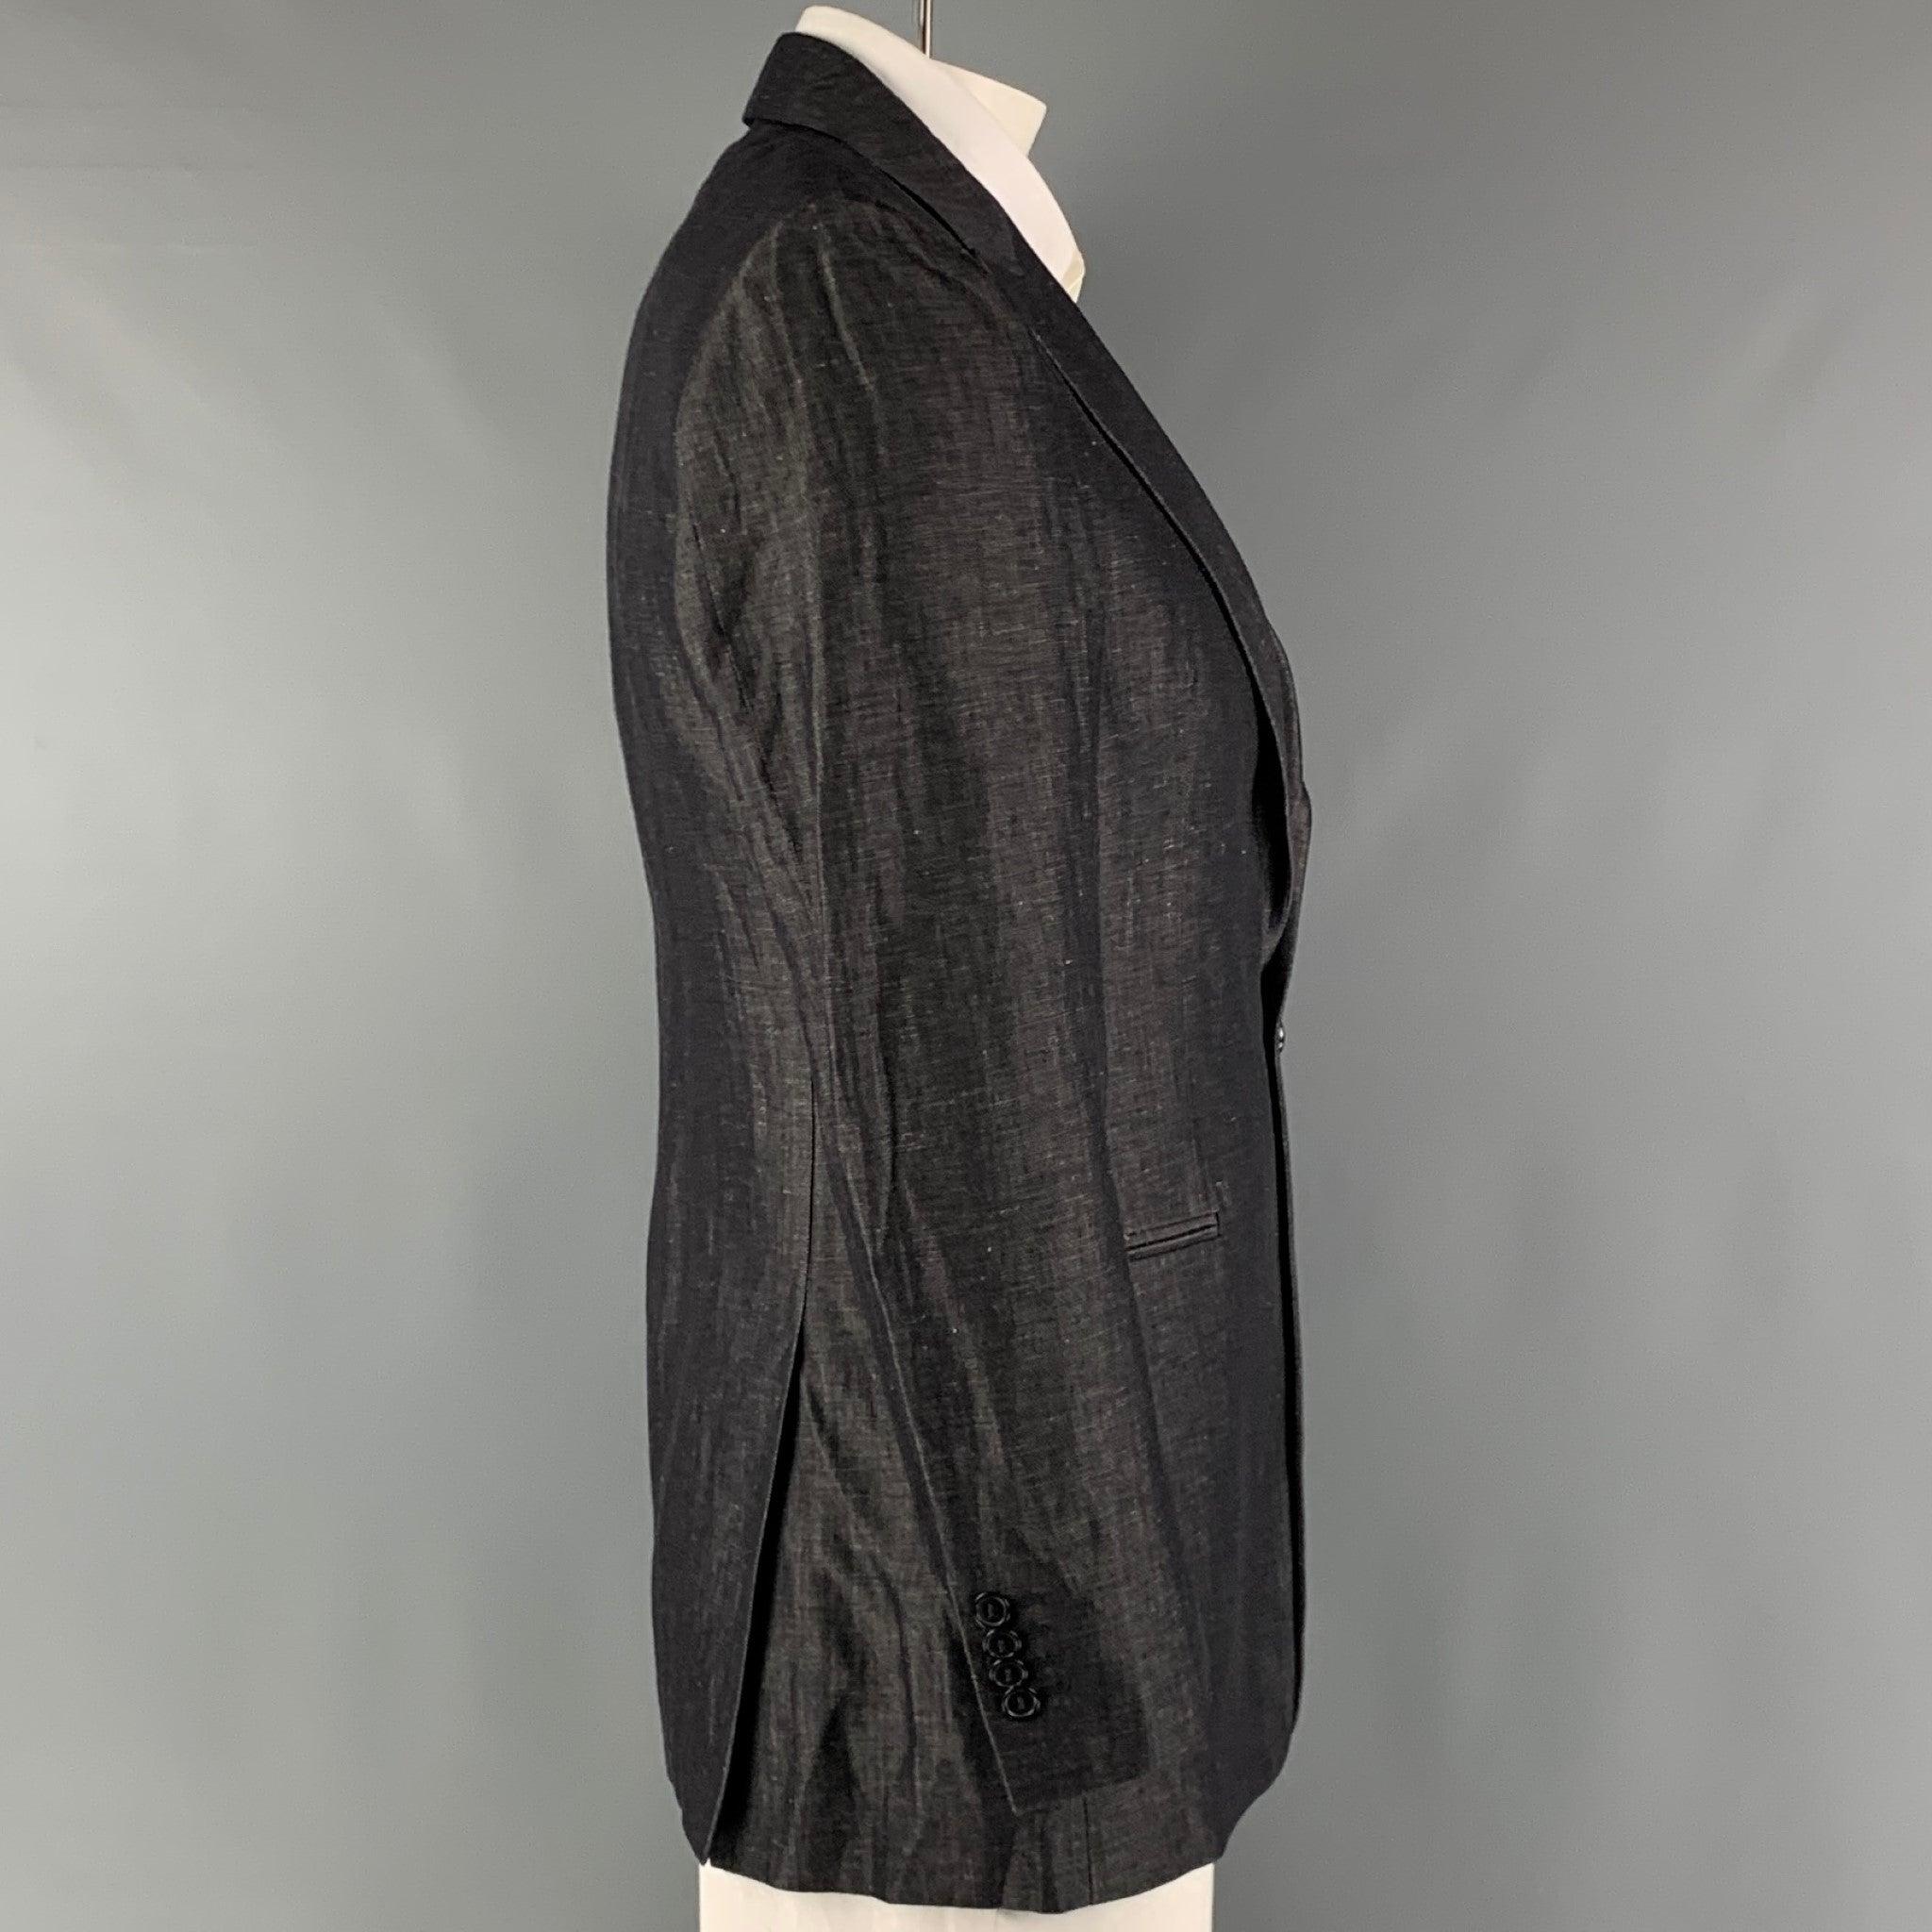 EMPORIO ARMANI sport coat comes in a charcoal twill woven material with a full liner featuring a single breasted, single button closure, welt pockets, peak lapel and double back vent. Made In Italy.Very Good Pre-Owned Condition.
Fabric Tag Removed.